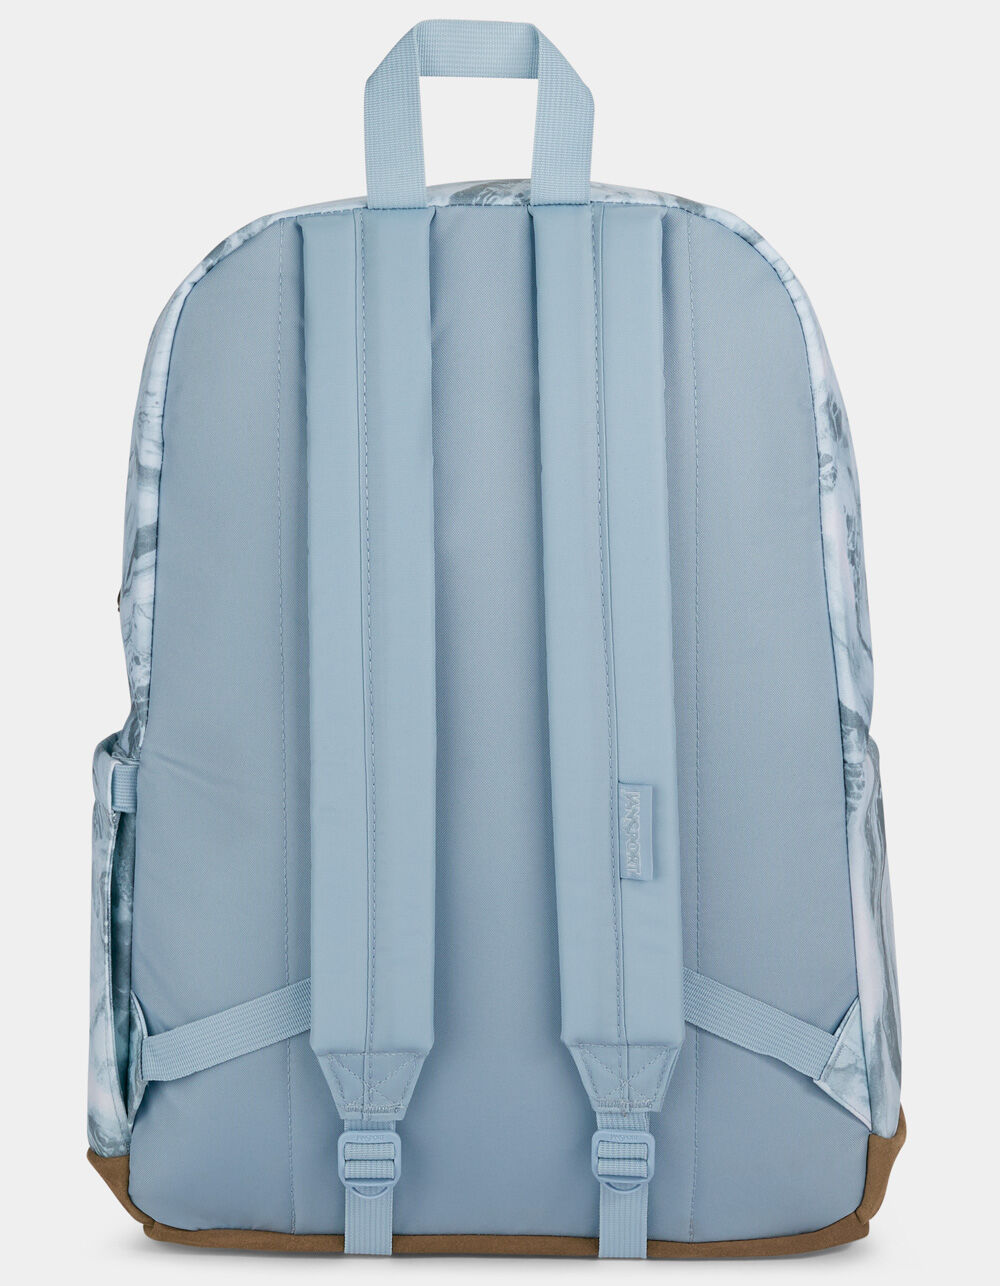 JANSPORT Right Pack Expressions Mined Marble Backpack - MULTI | Tillys